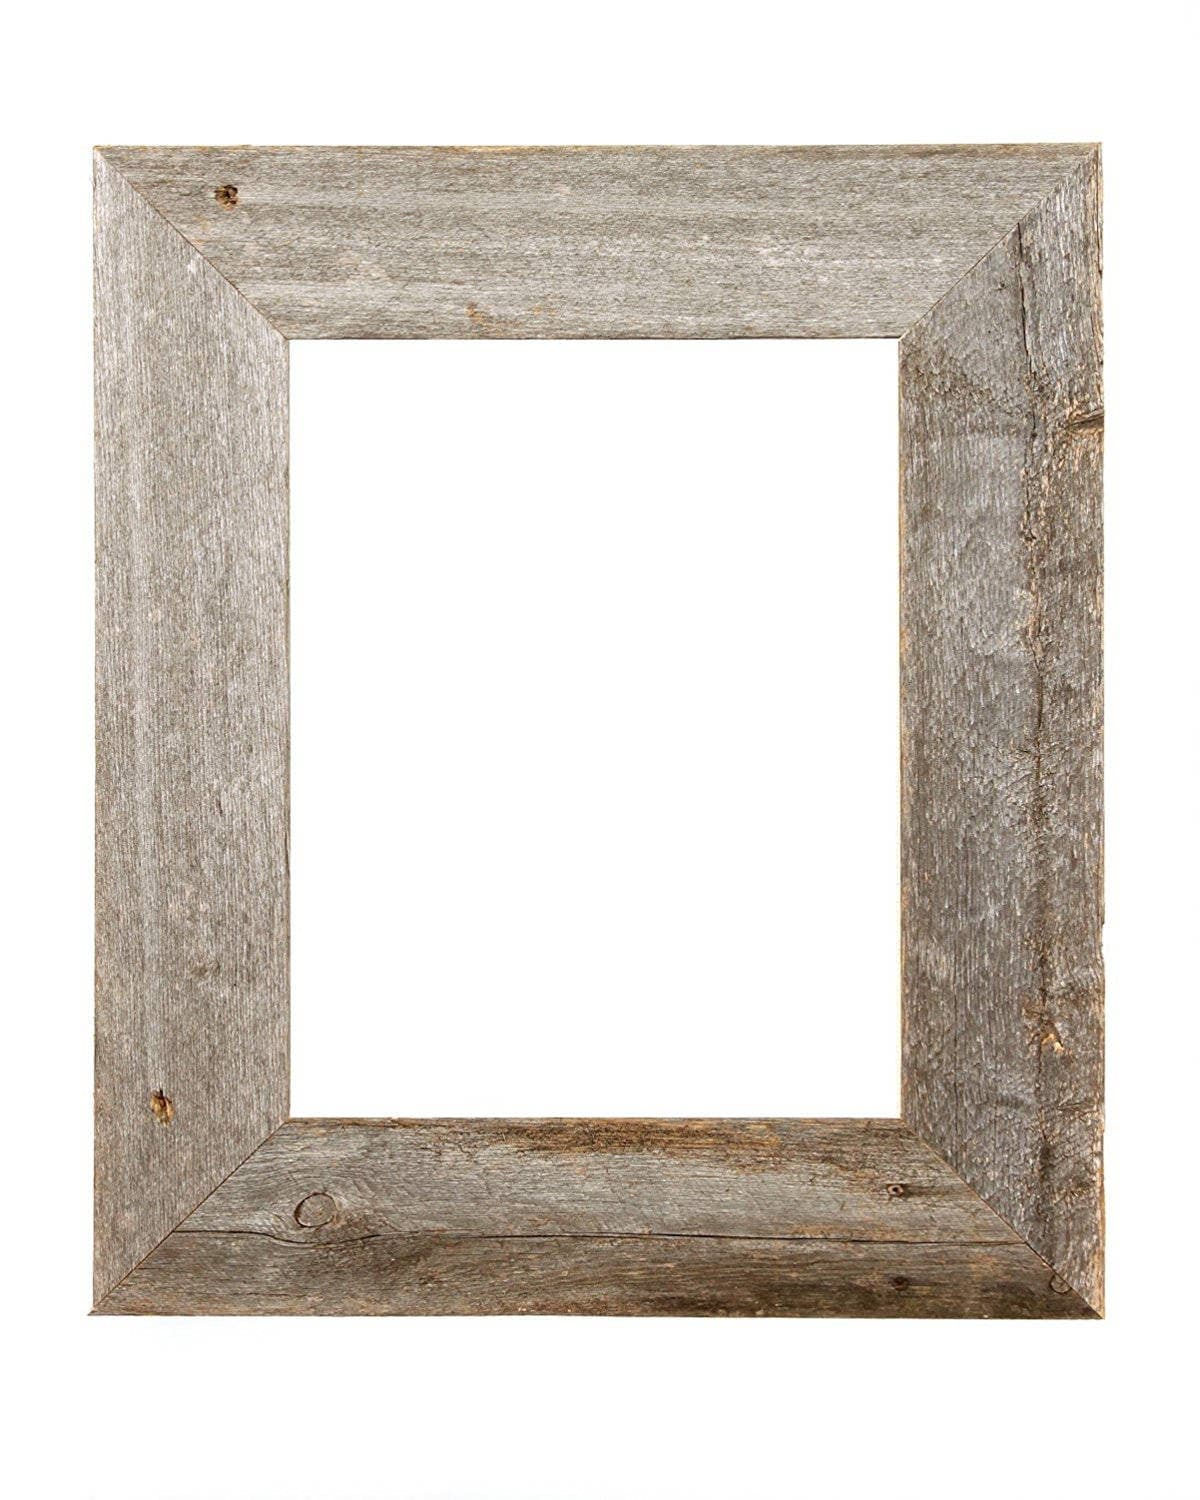 30x40 Picture Frame Mockup PSD/JPEG - Rustic Stone (355378)